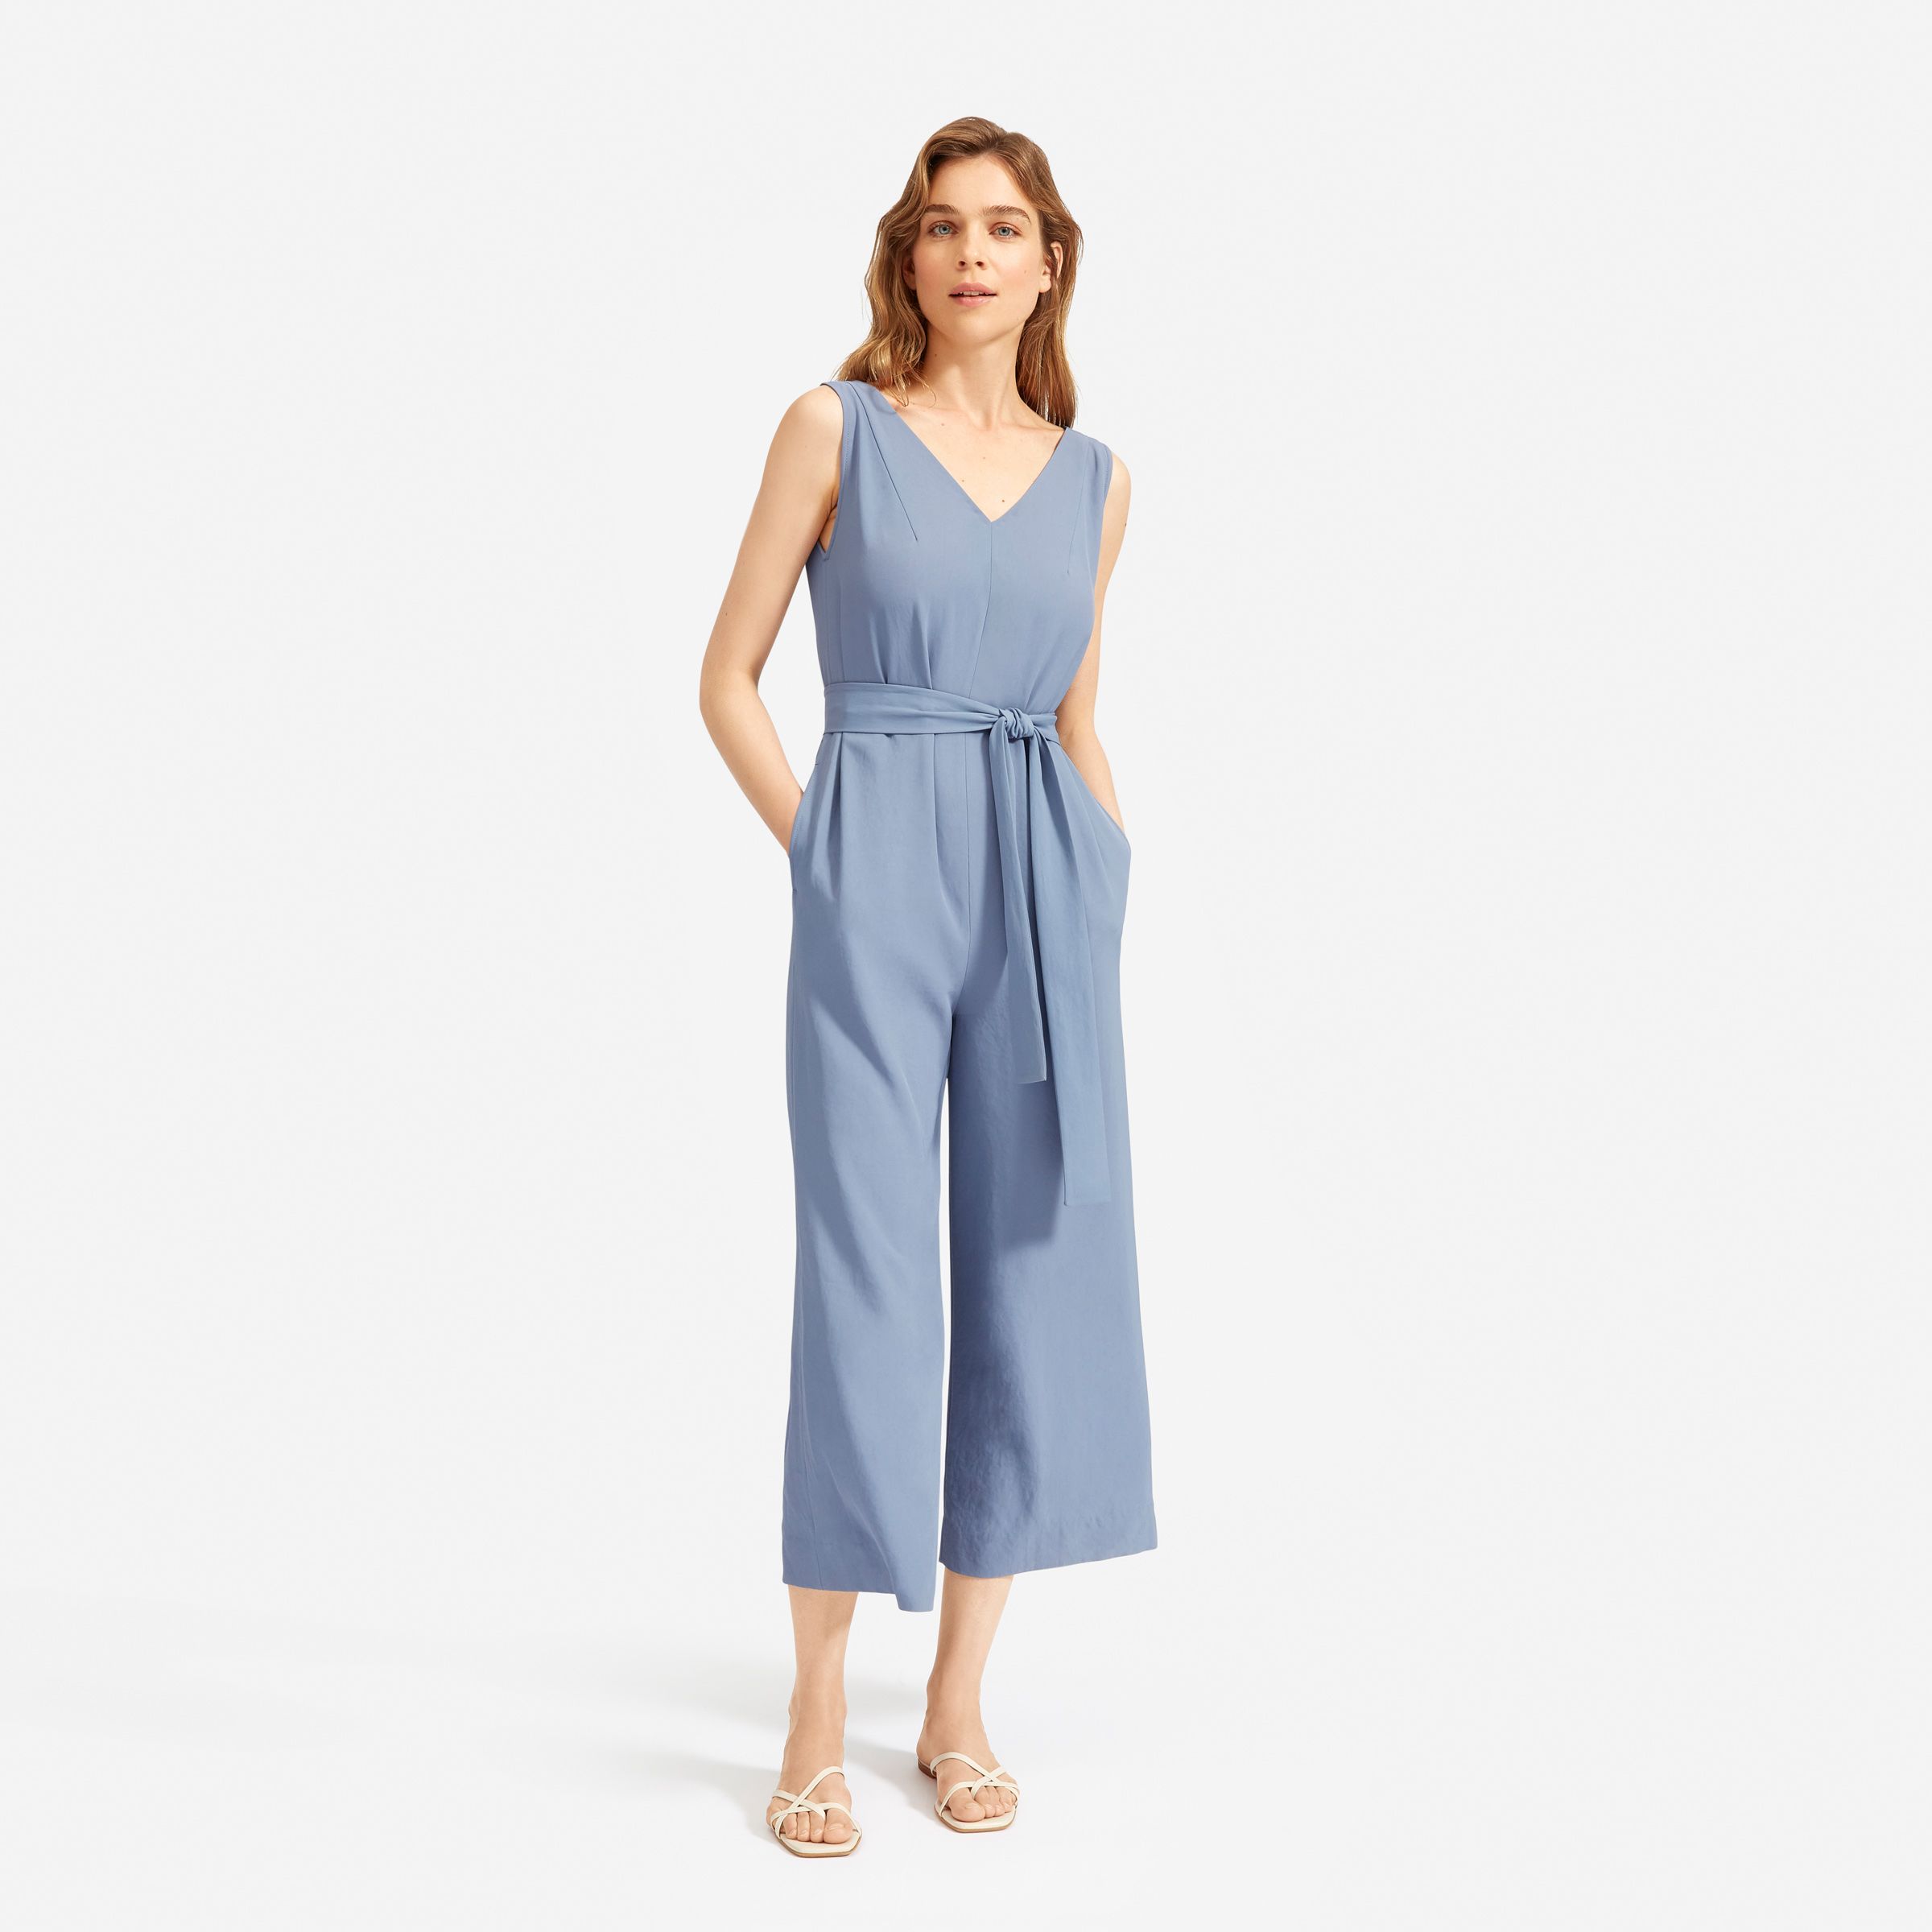 one piece jumpsuits for weddings